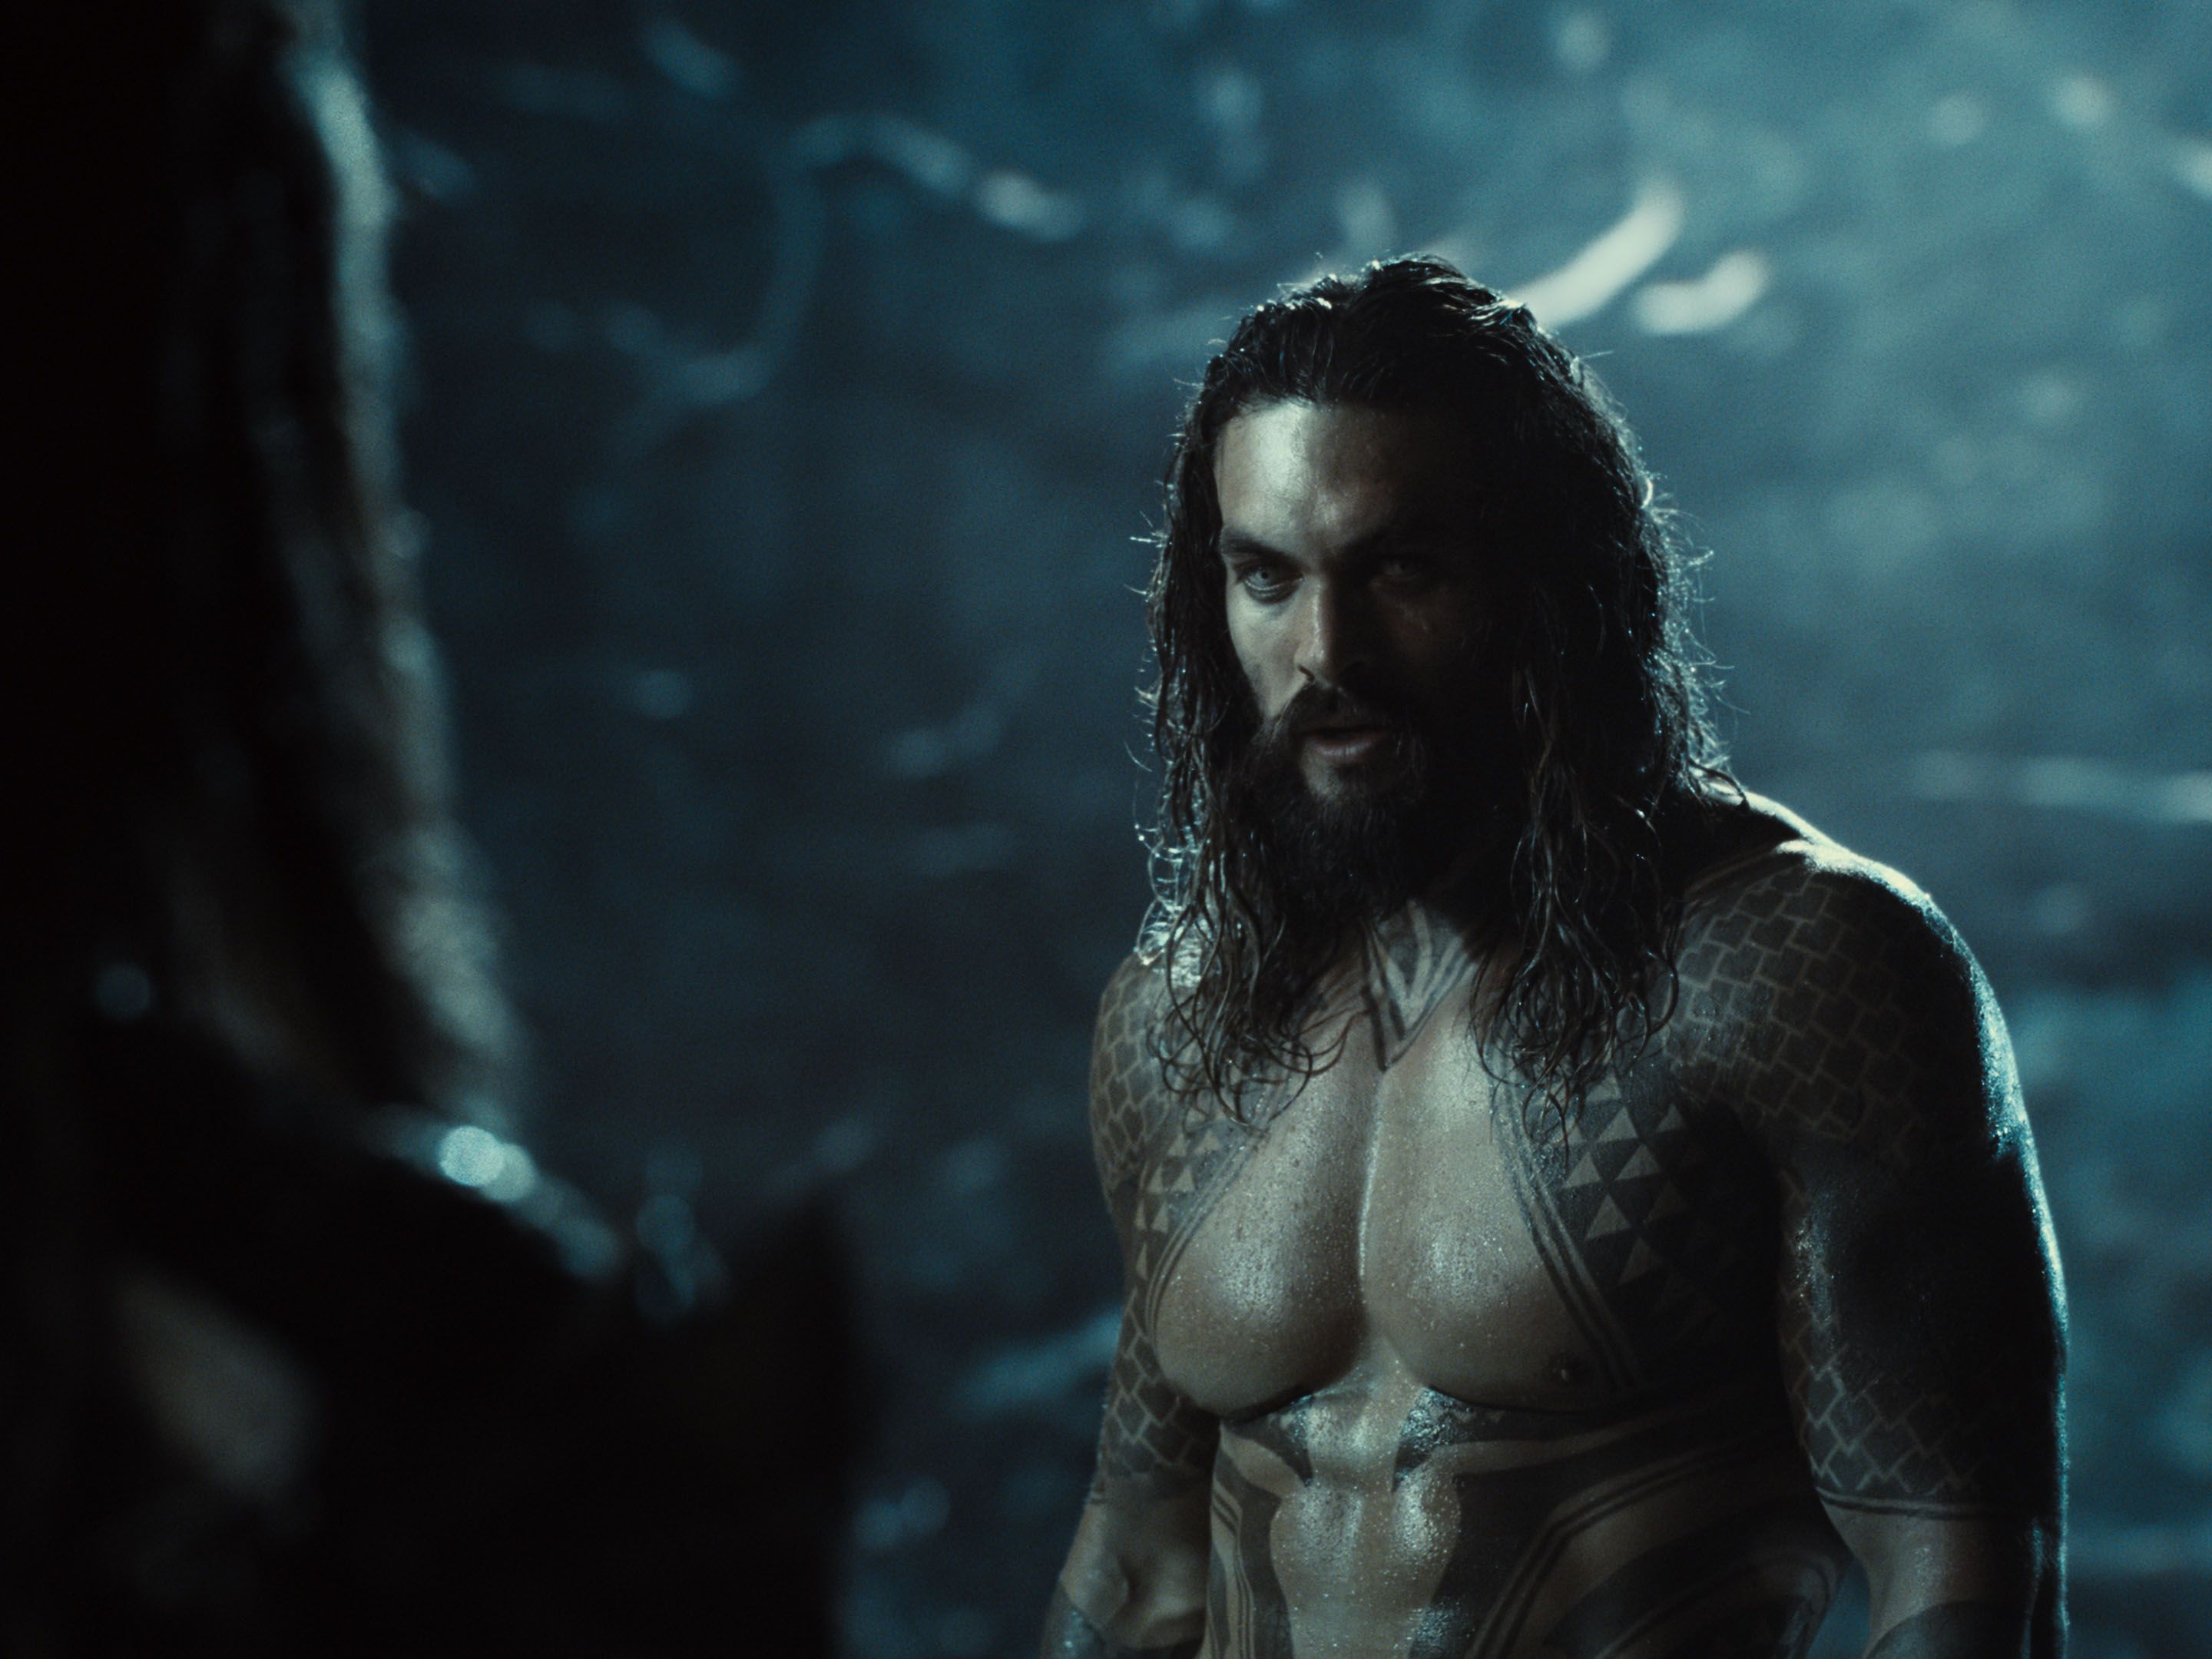 Jason Momoa as Aquaman in in Zack Snyder's Justice League